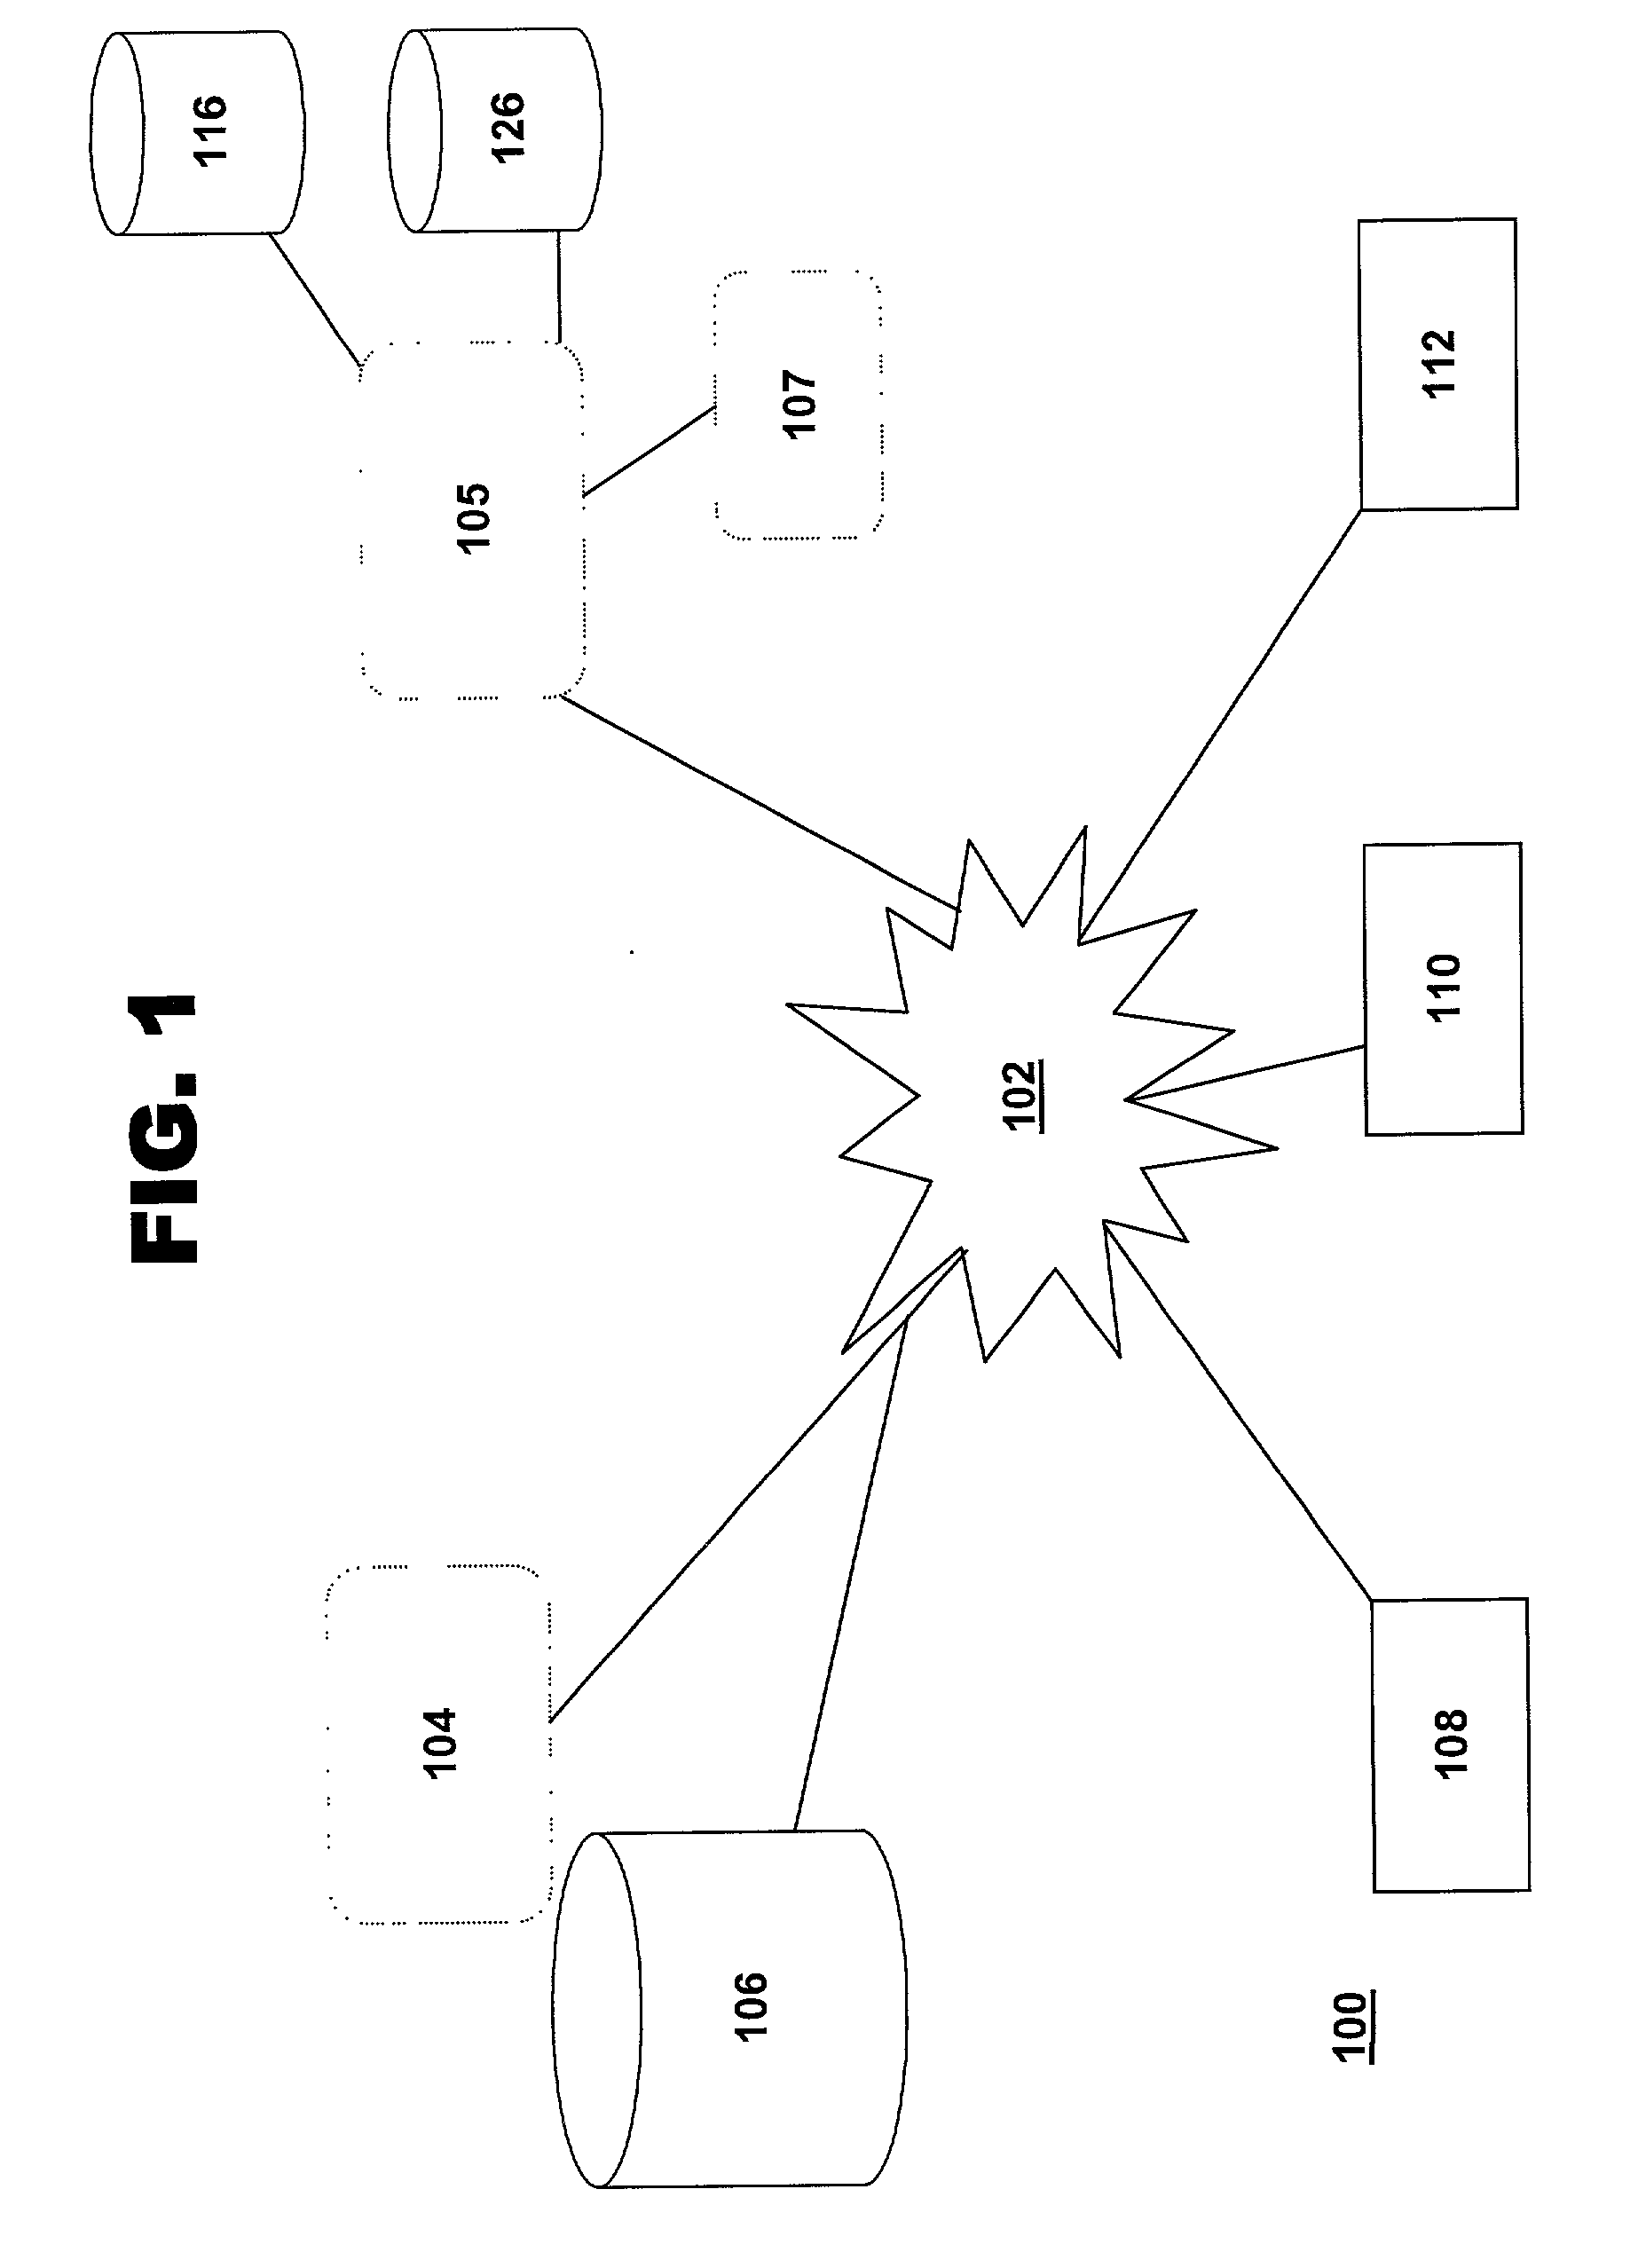 Method and system for booting of a target device in a network environment based on automatic client discovery and scan